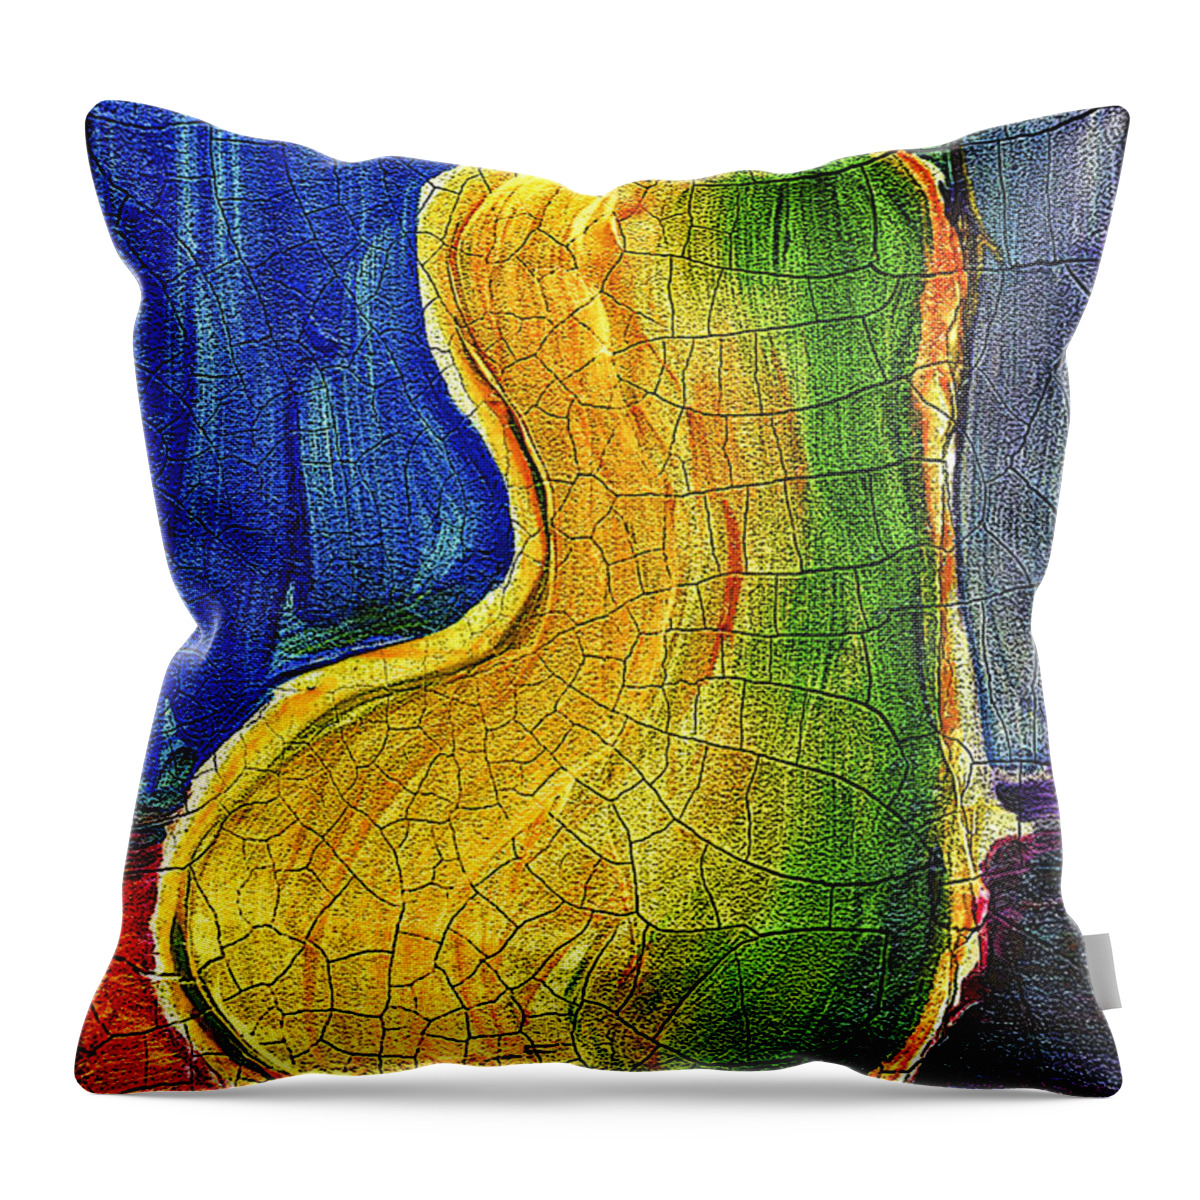 Pear Throw Pillow featuring the painting Pear 2 by Walt Foegelle